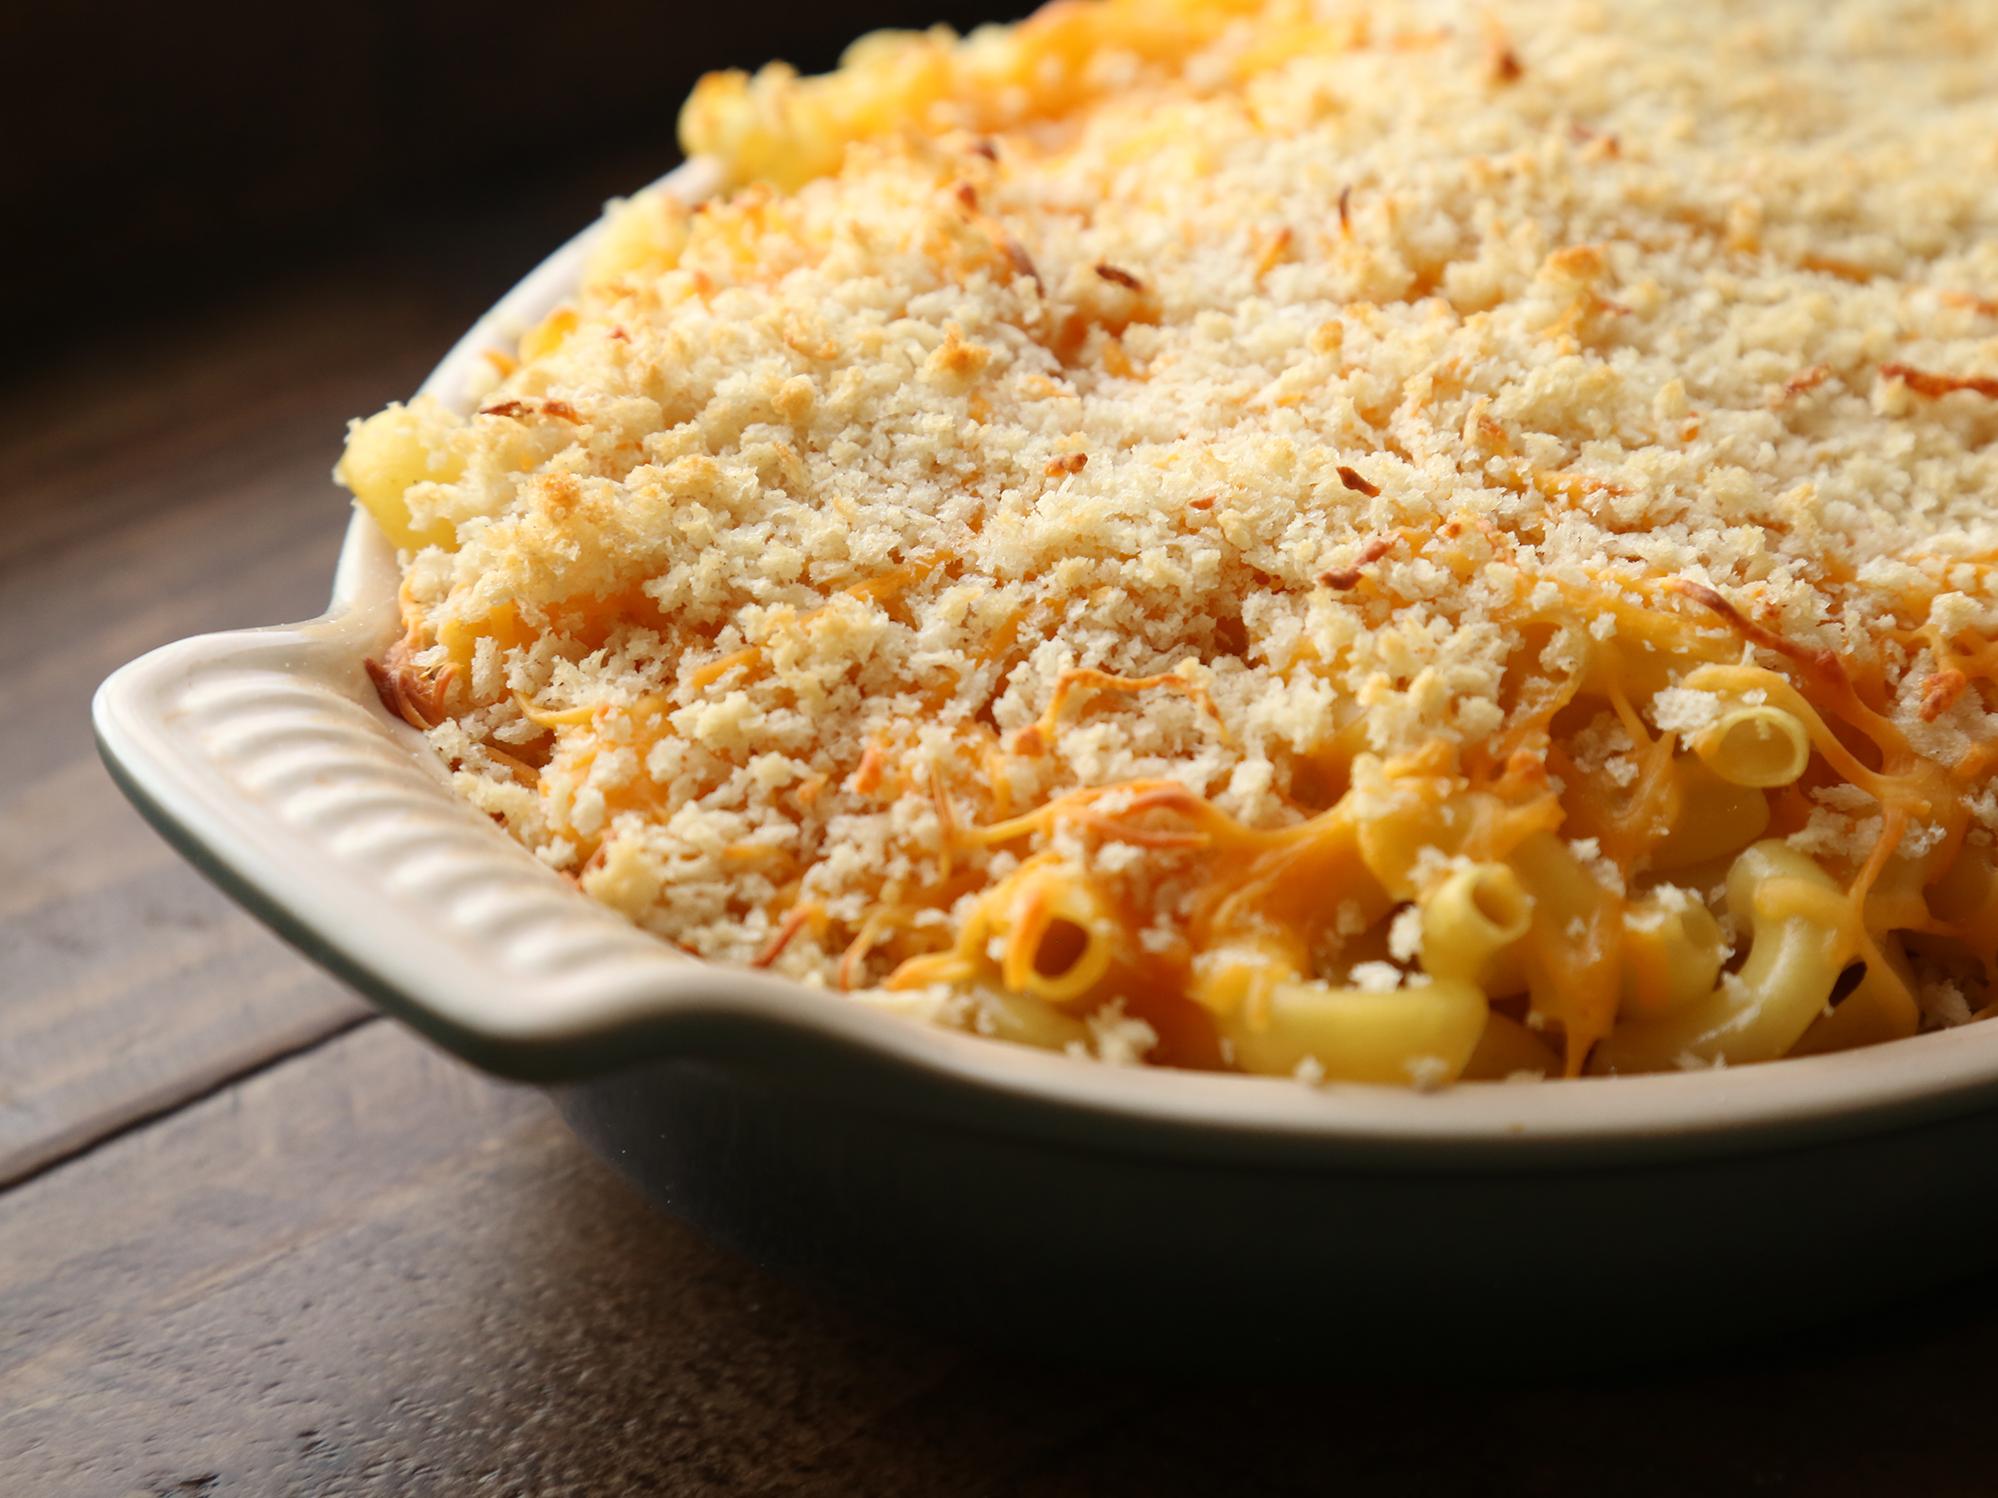  The secret blend of spices that make this Mac and Cheese unforgettable